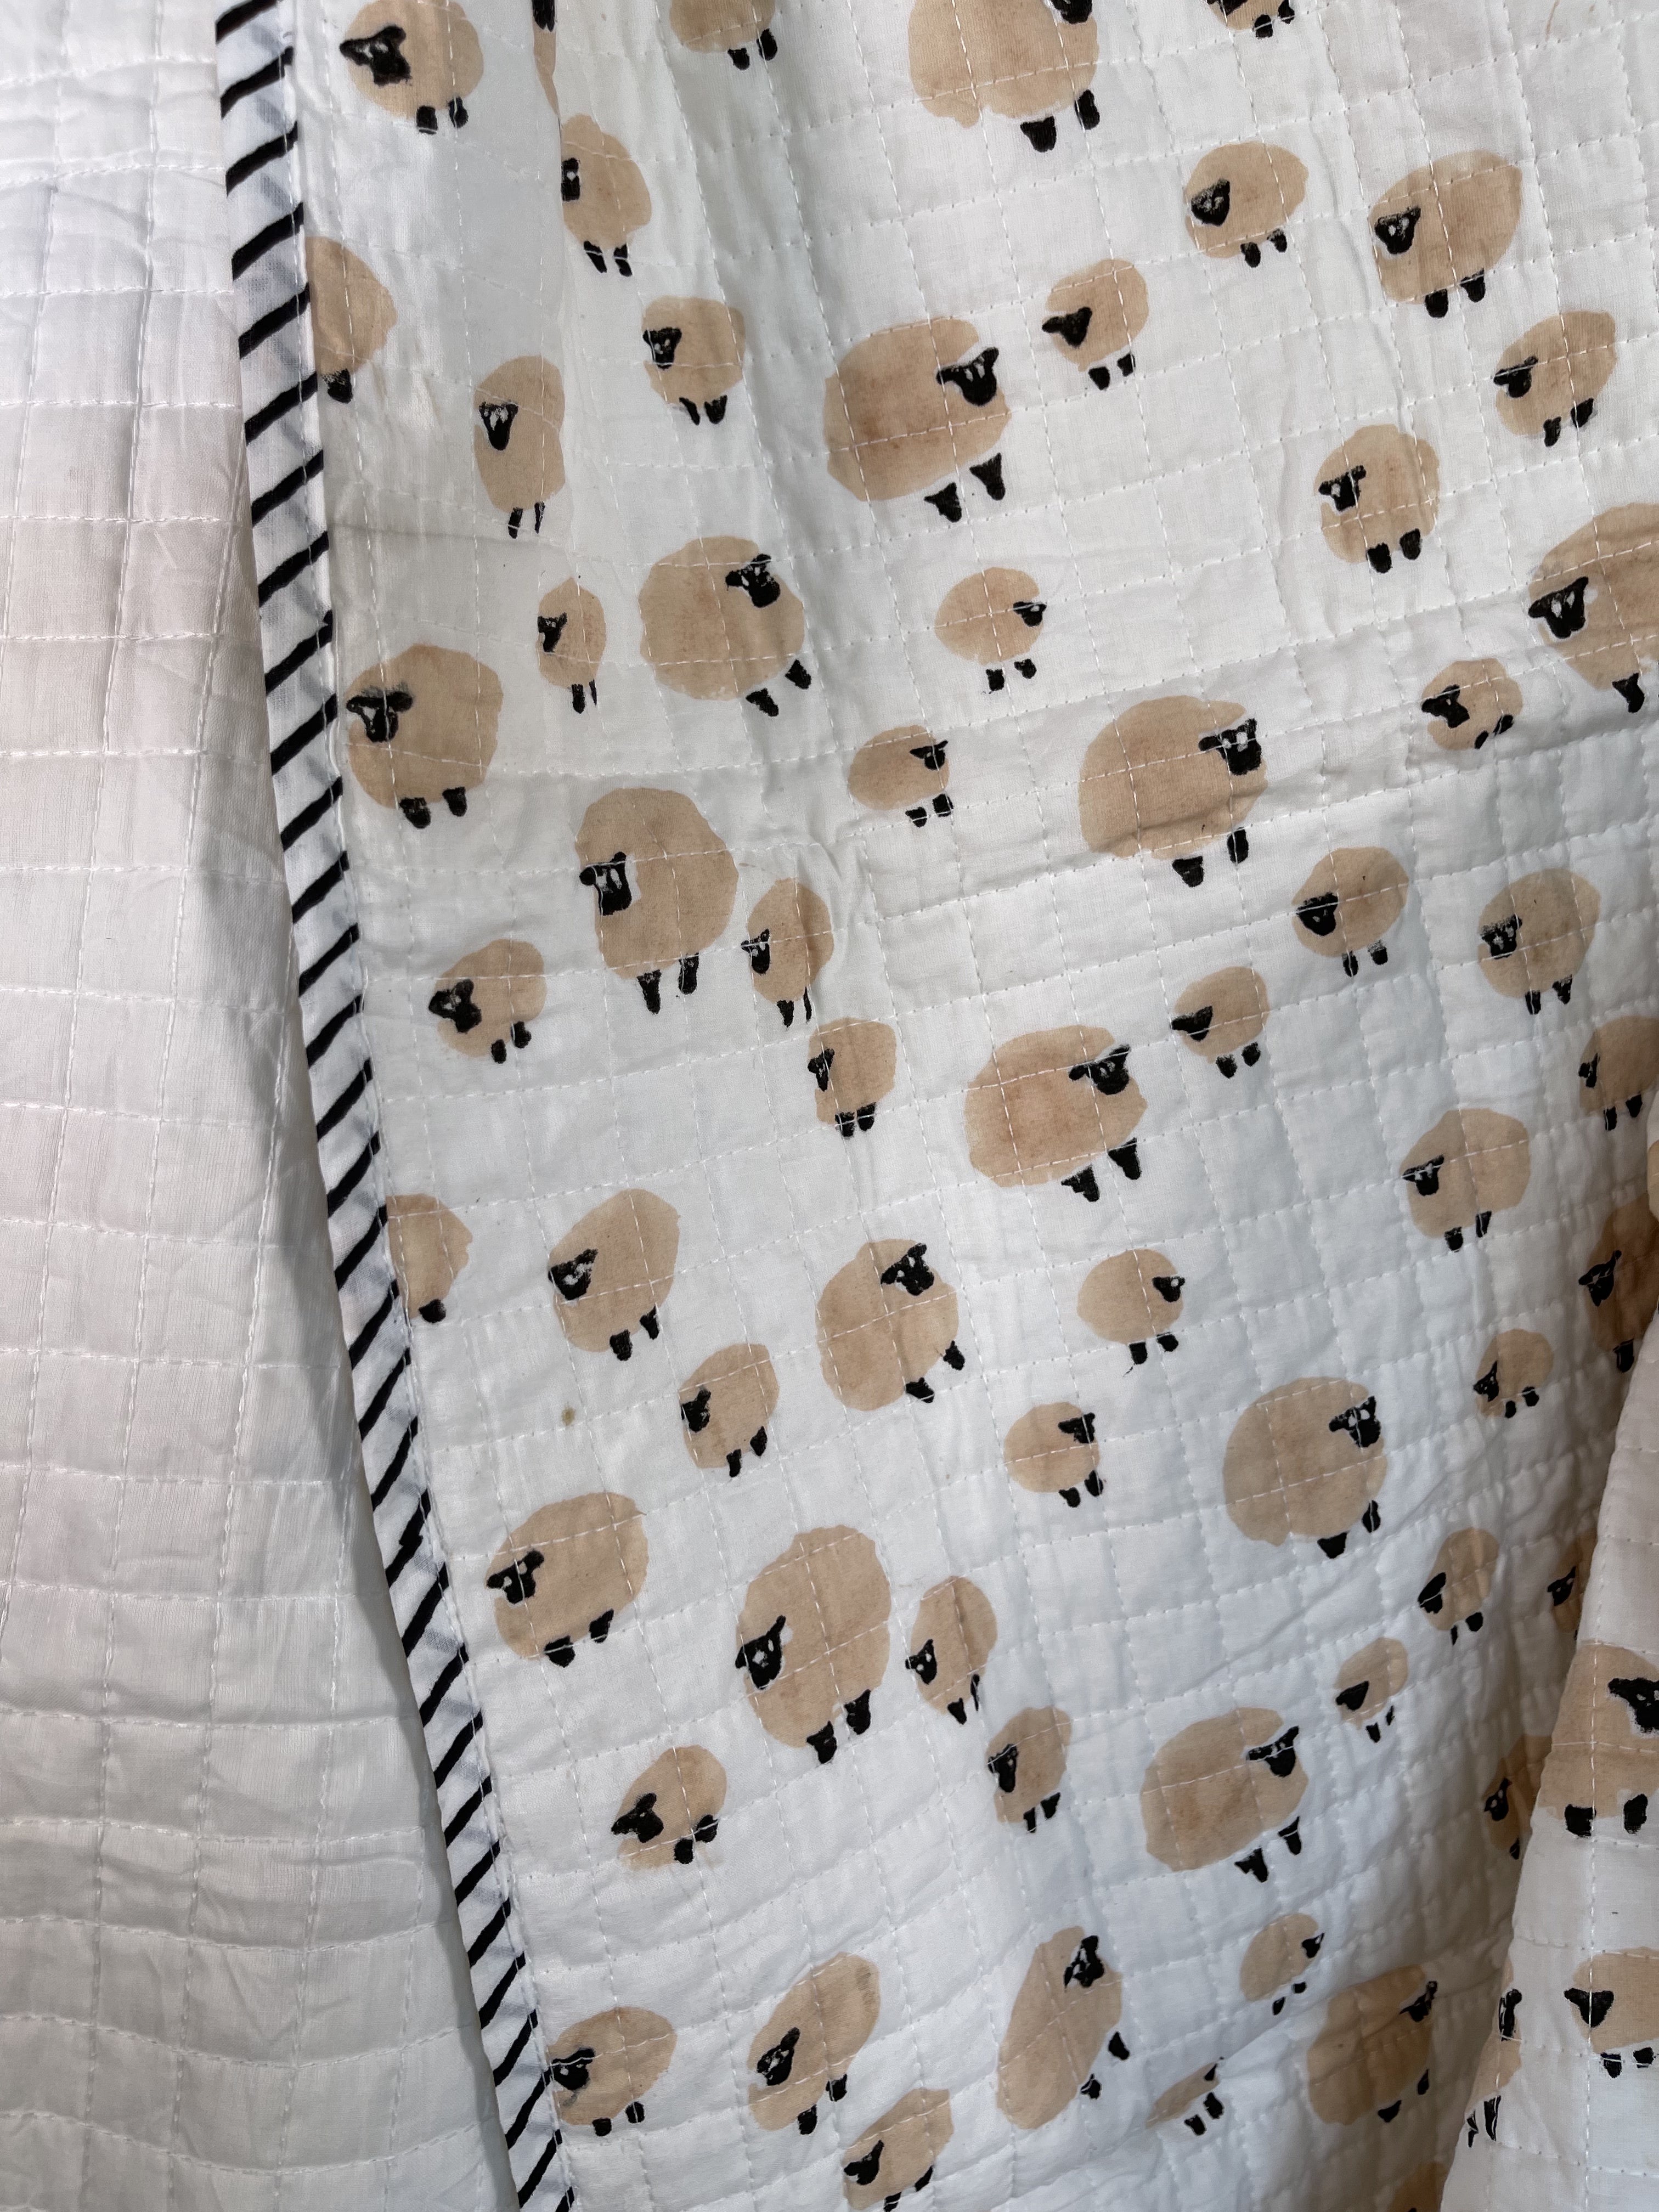 Handblock printed cotton baby quilt, machine stitched in small squares for easy care and washing. Lightly padded with cotton.